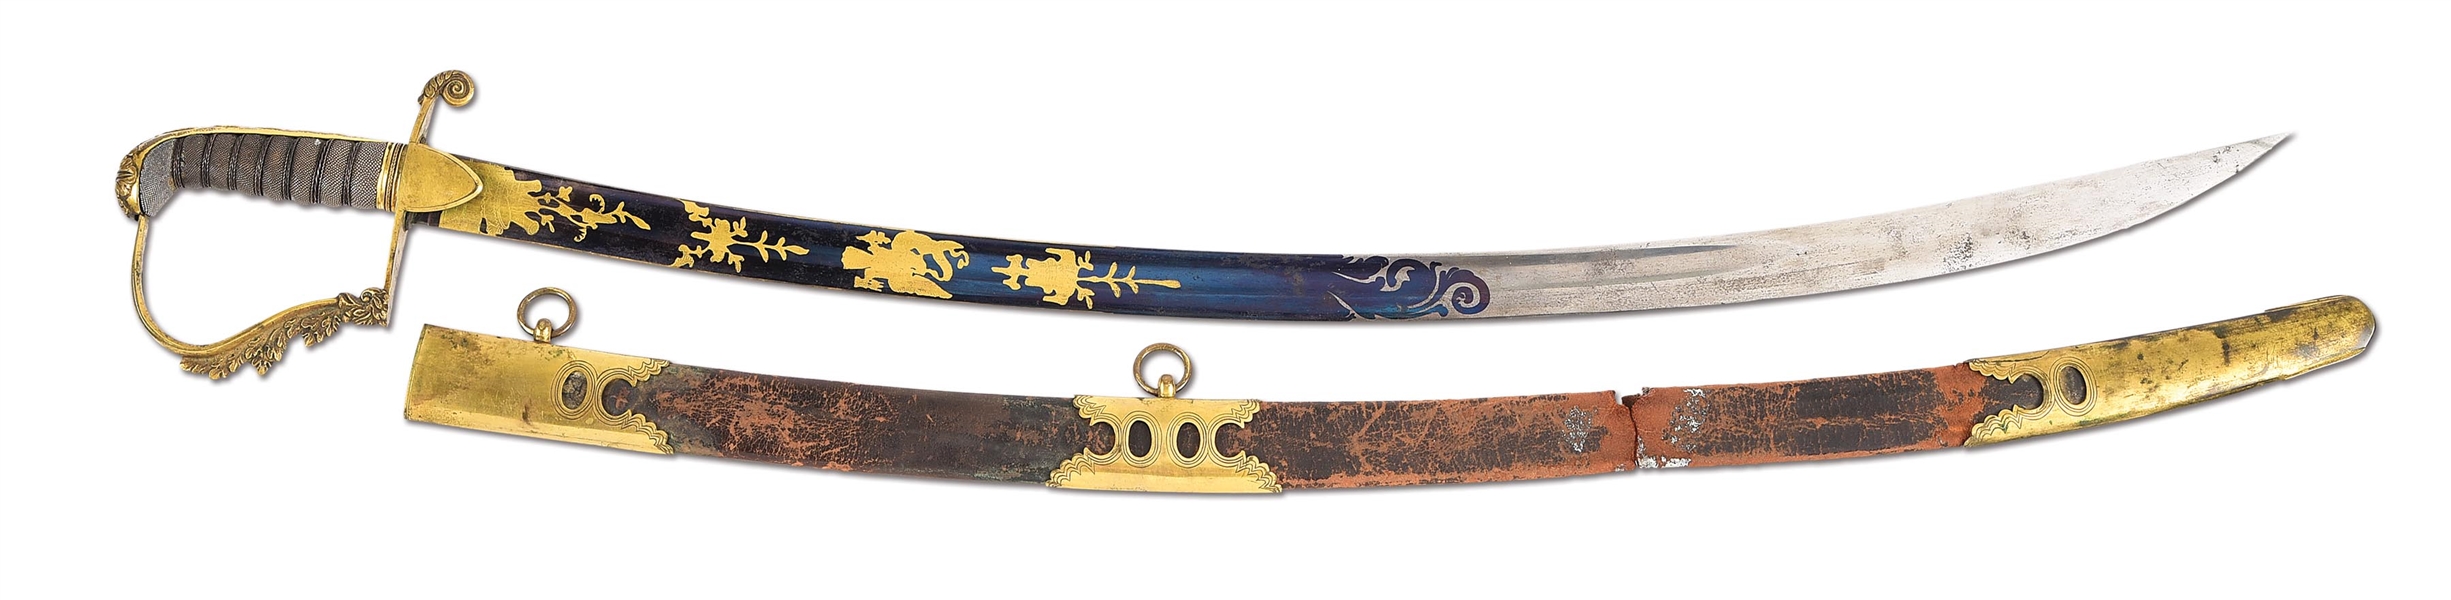 IMPORTED AMERICAN WAR OF 1812 OFFICERS SABER WITH SCABBARD.